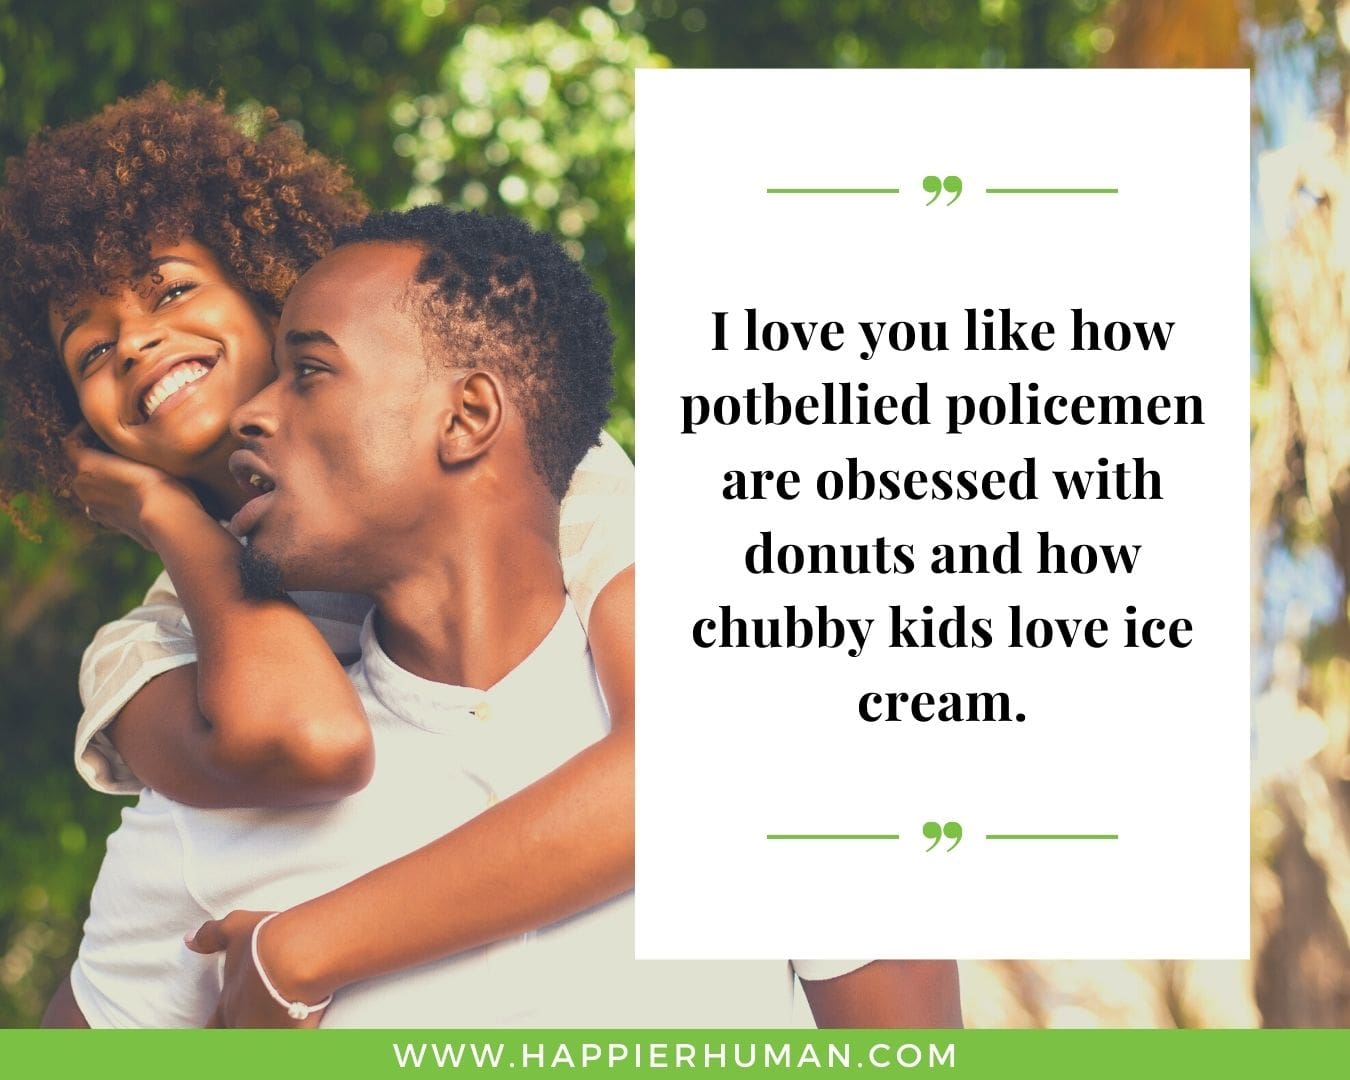 Happy affection quotes of love - “I love you like how potbellied policemen are obsessed with donuts and how chubby kids love ice cream.”